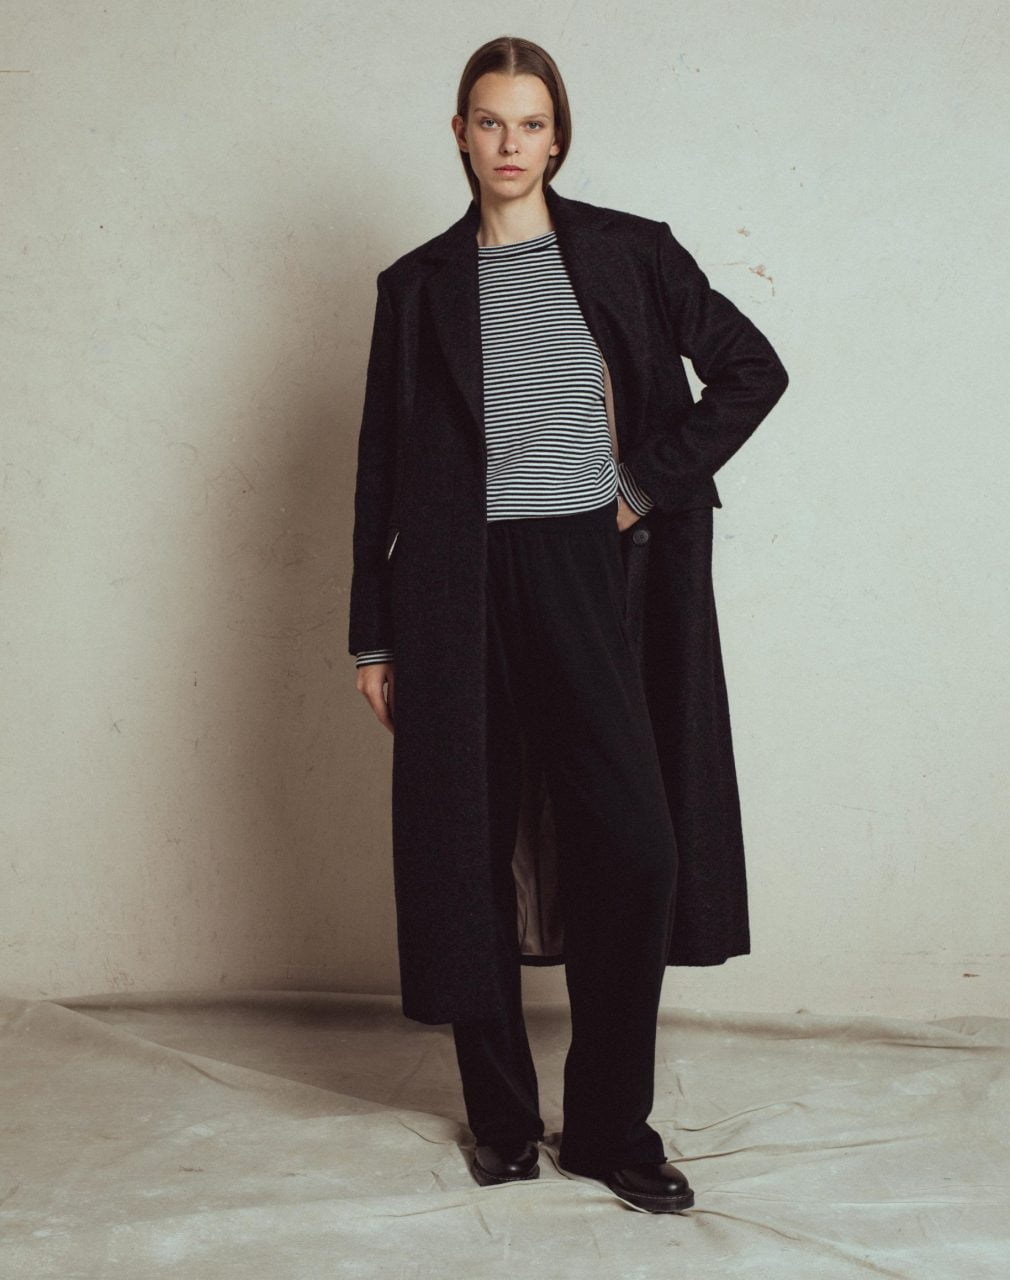 loose straight fit long coat bitter, classic men style silhouette with shoulder pads, satin lining, long slit at the back,  with side pockets with flaps, front hidden buttons.